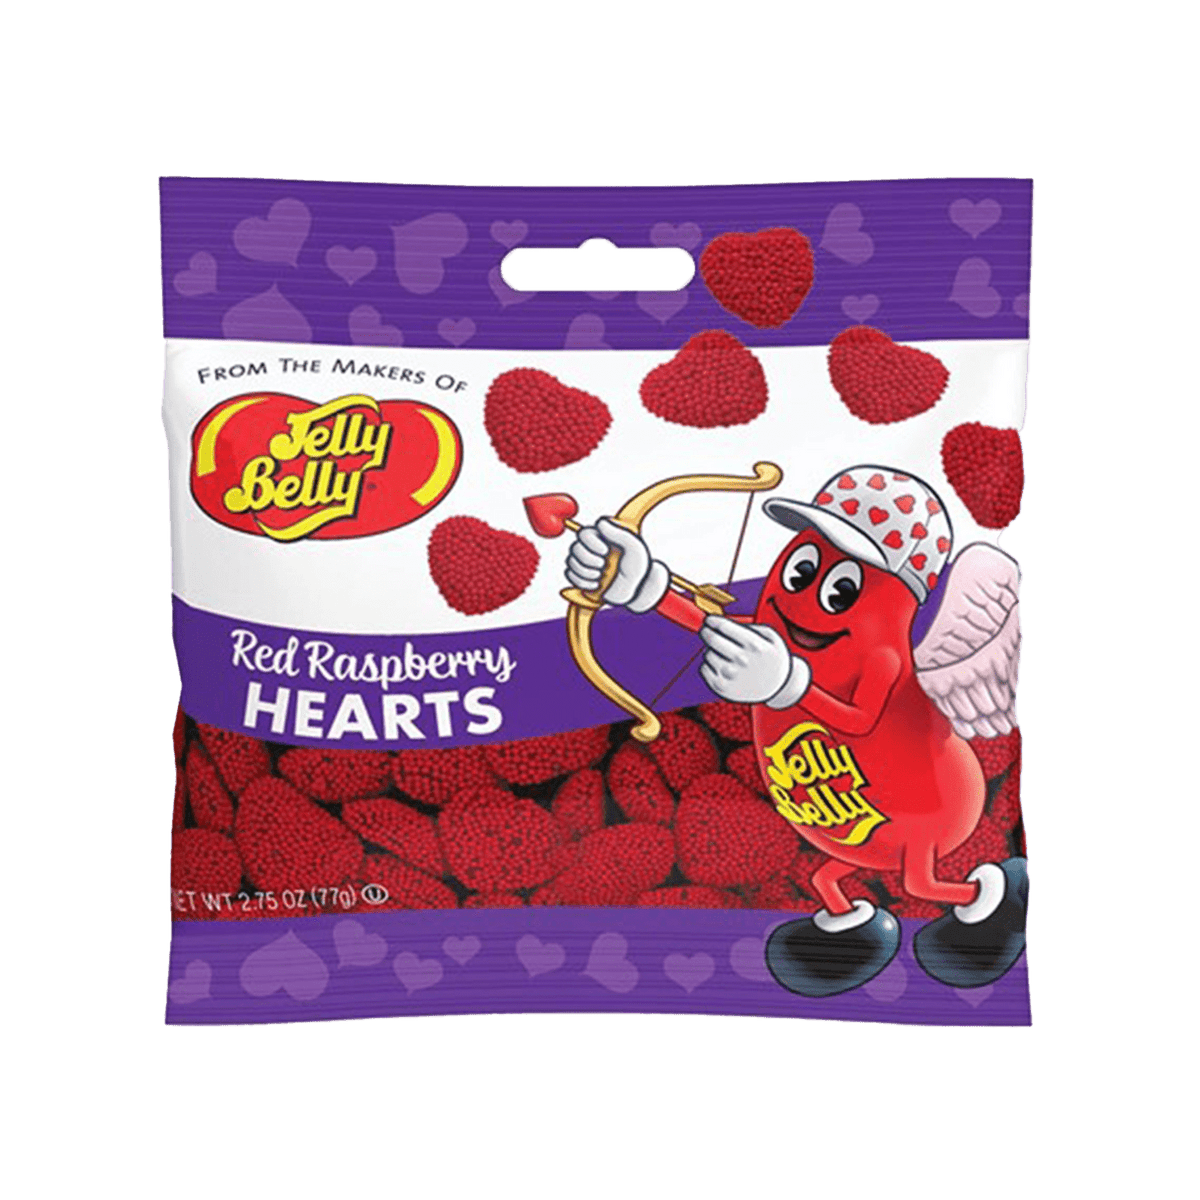 Lolli and Pops Novelty Jelly Belly Red Raspberry Hearts